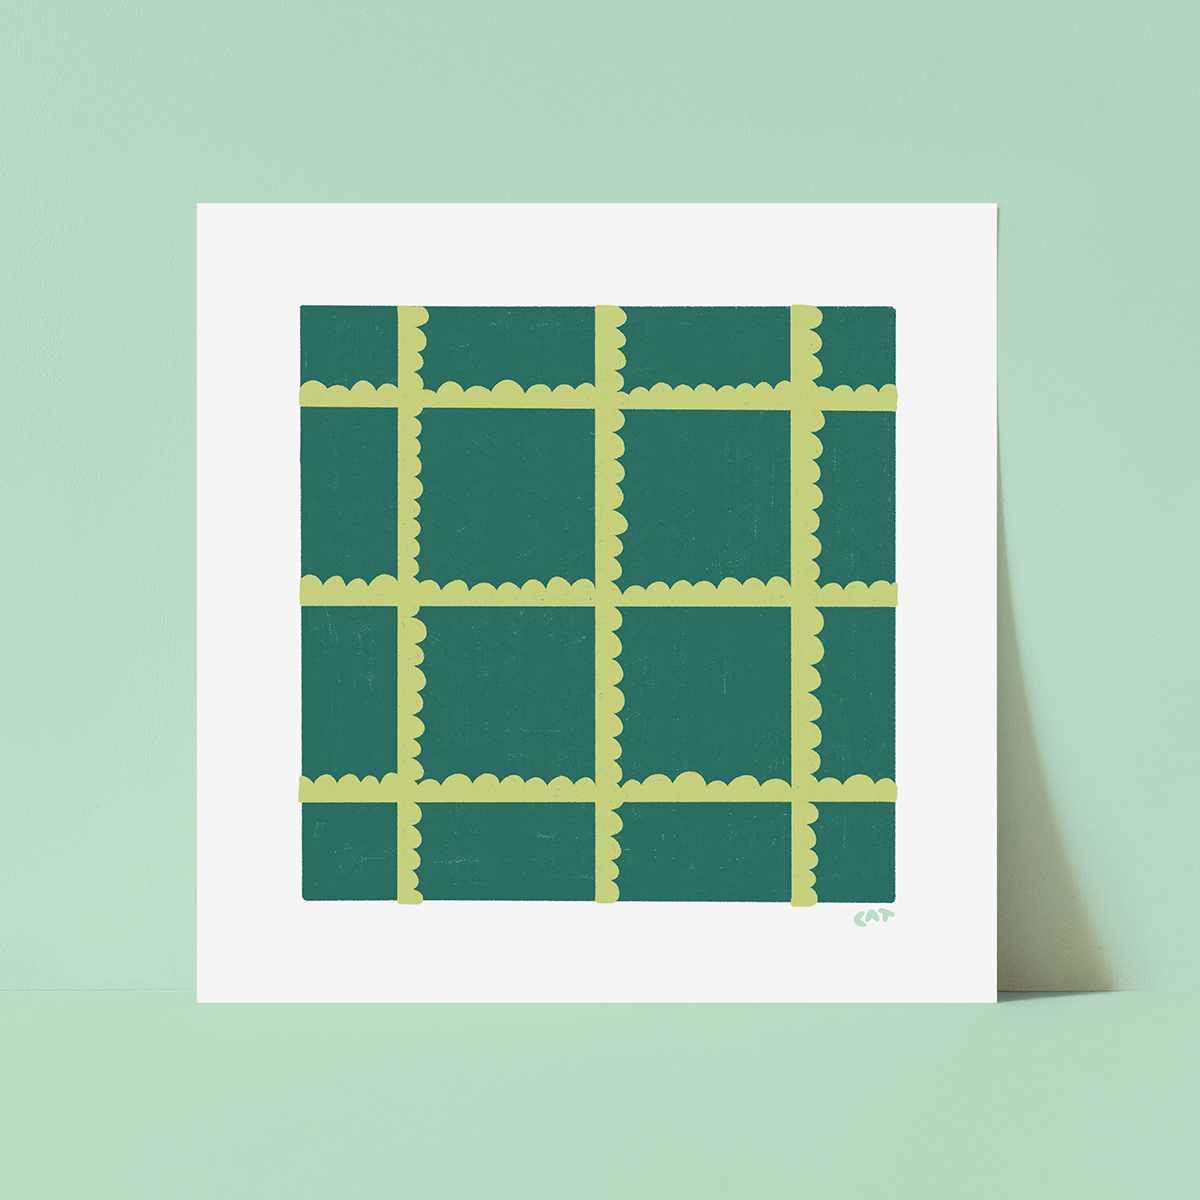 White unframed print of a dark green square with light green ruffles arranged in a grid.